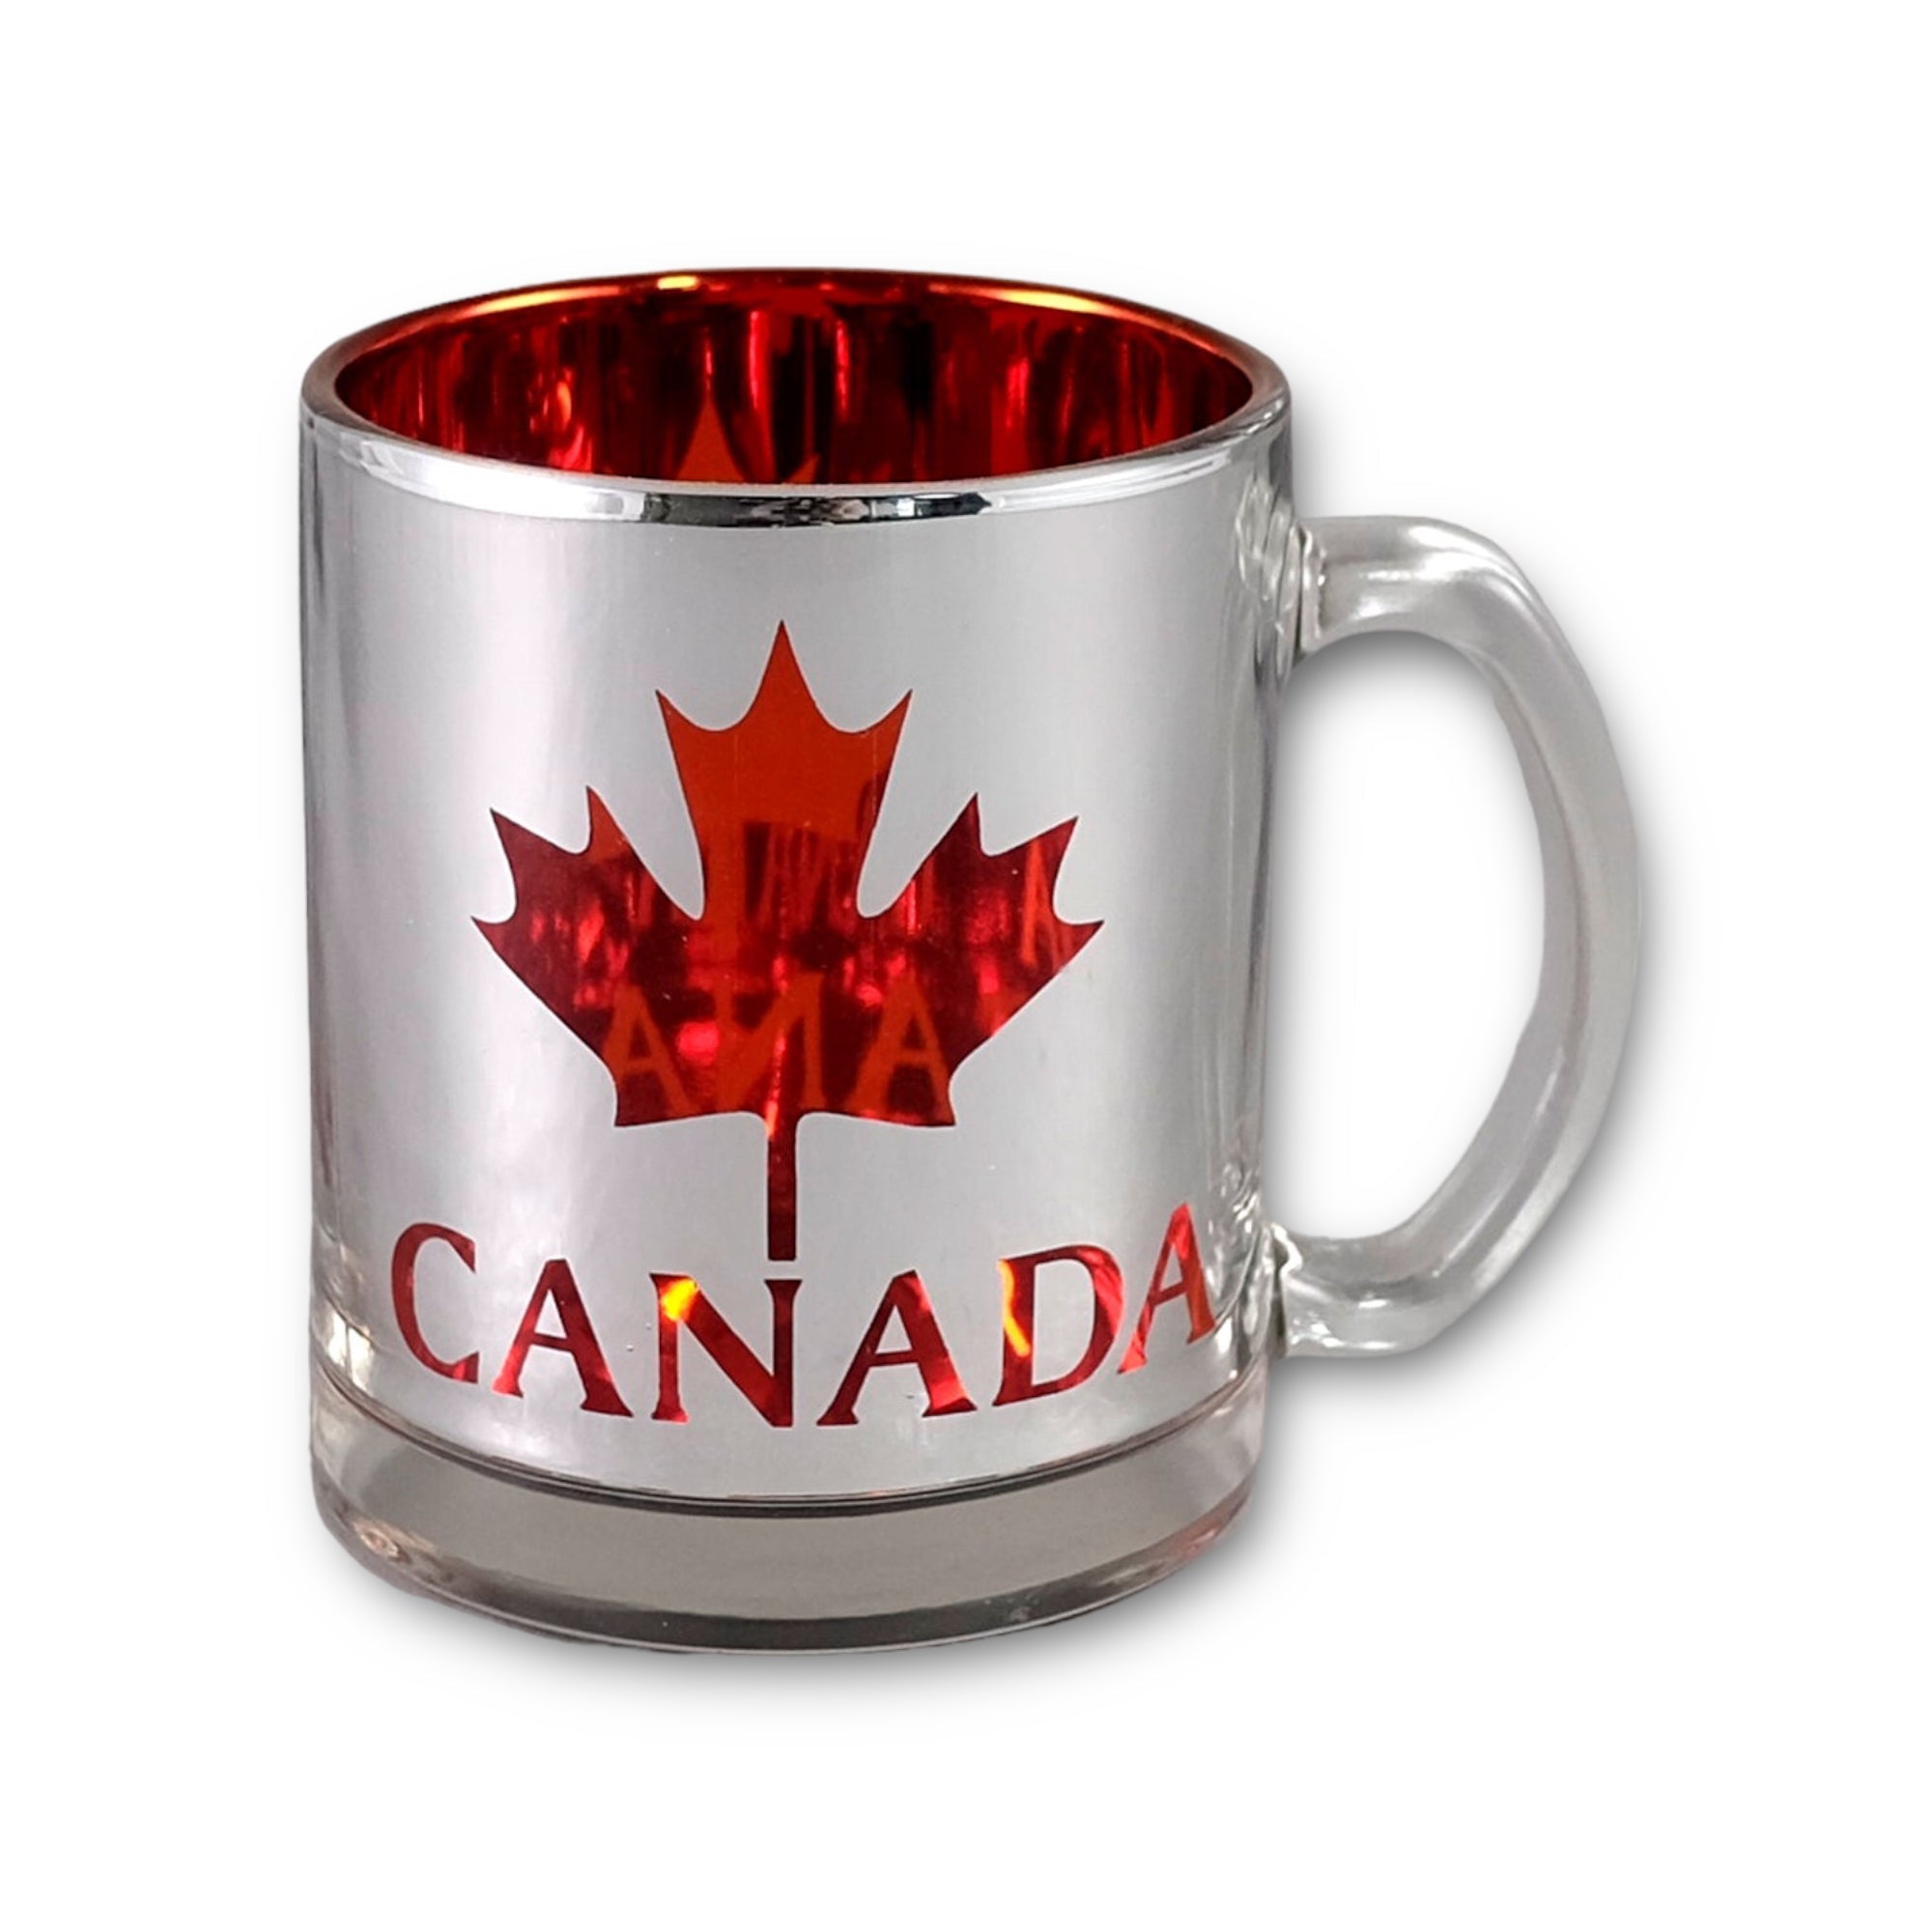 CANADA 11oz GLASS MUG - RED/SILVER W/ MAPLE LEAF FOR COLD AND HOT DRINKS MUG